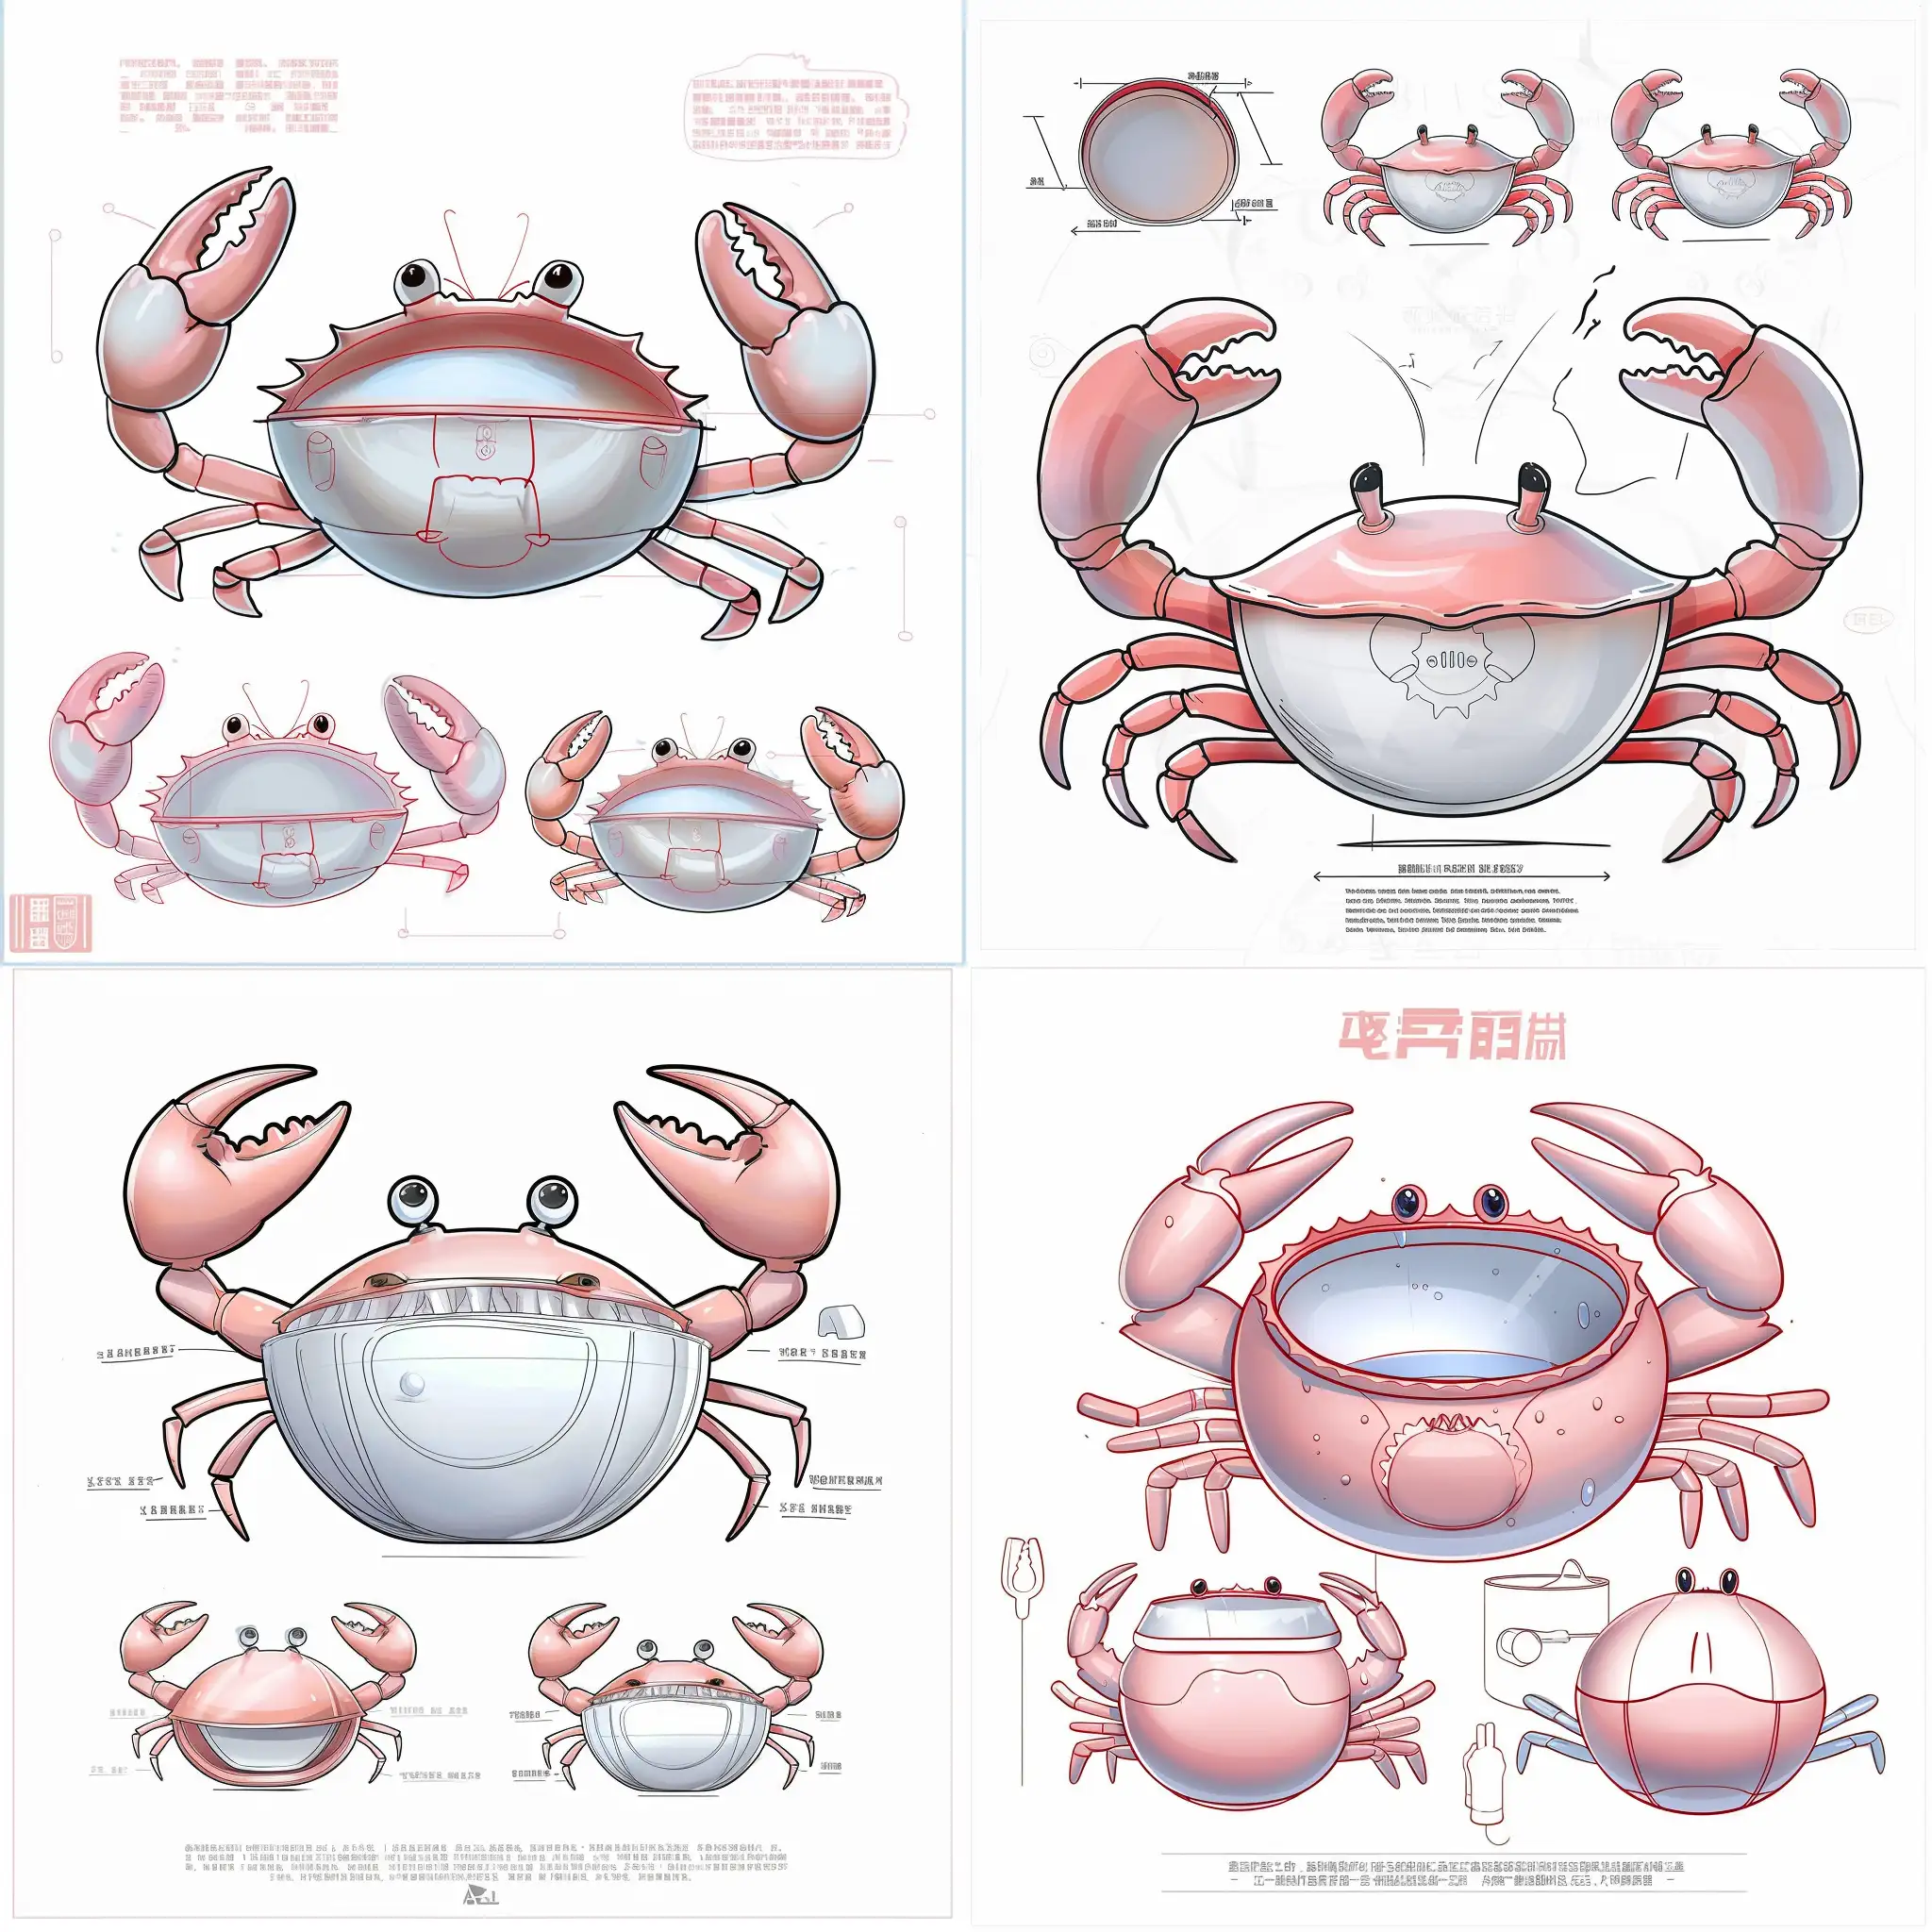 Cute-Portable-Childrens-Crab-Claw-Water-Bowl-Design-Sketch